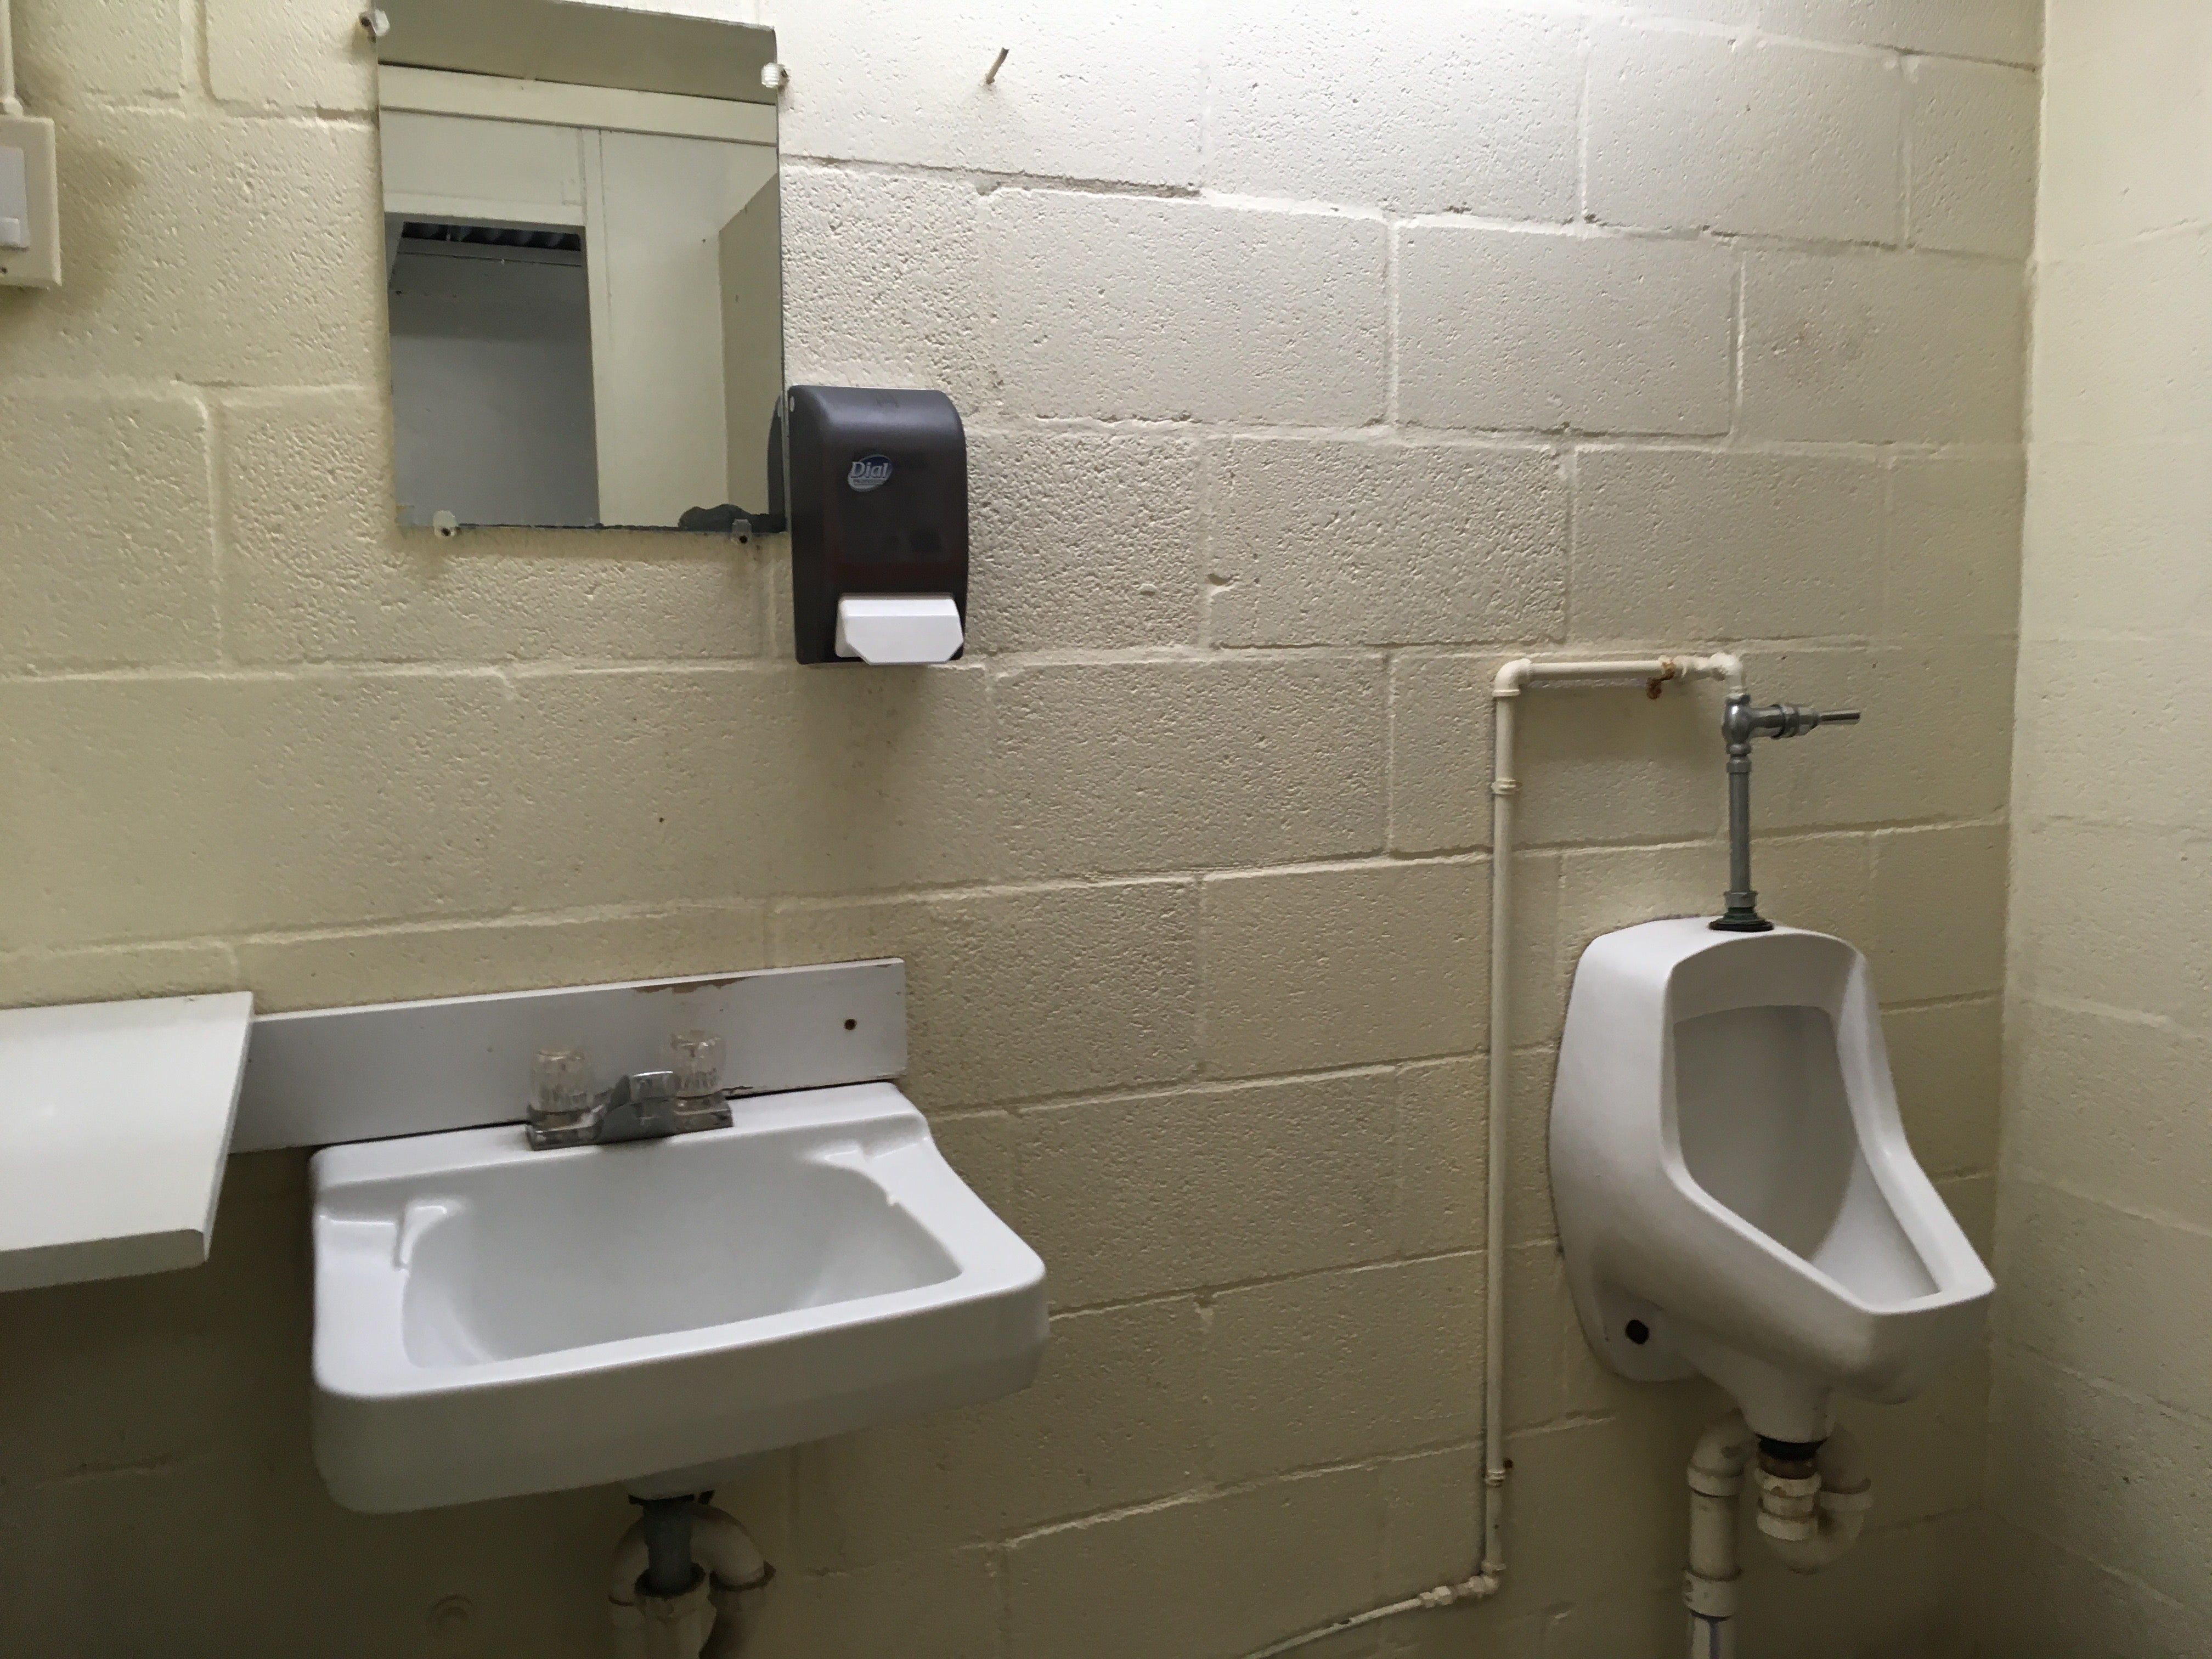 The restrooms offer basic sinks and toilets